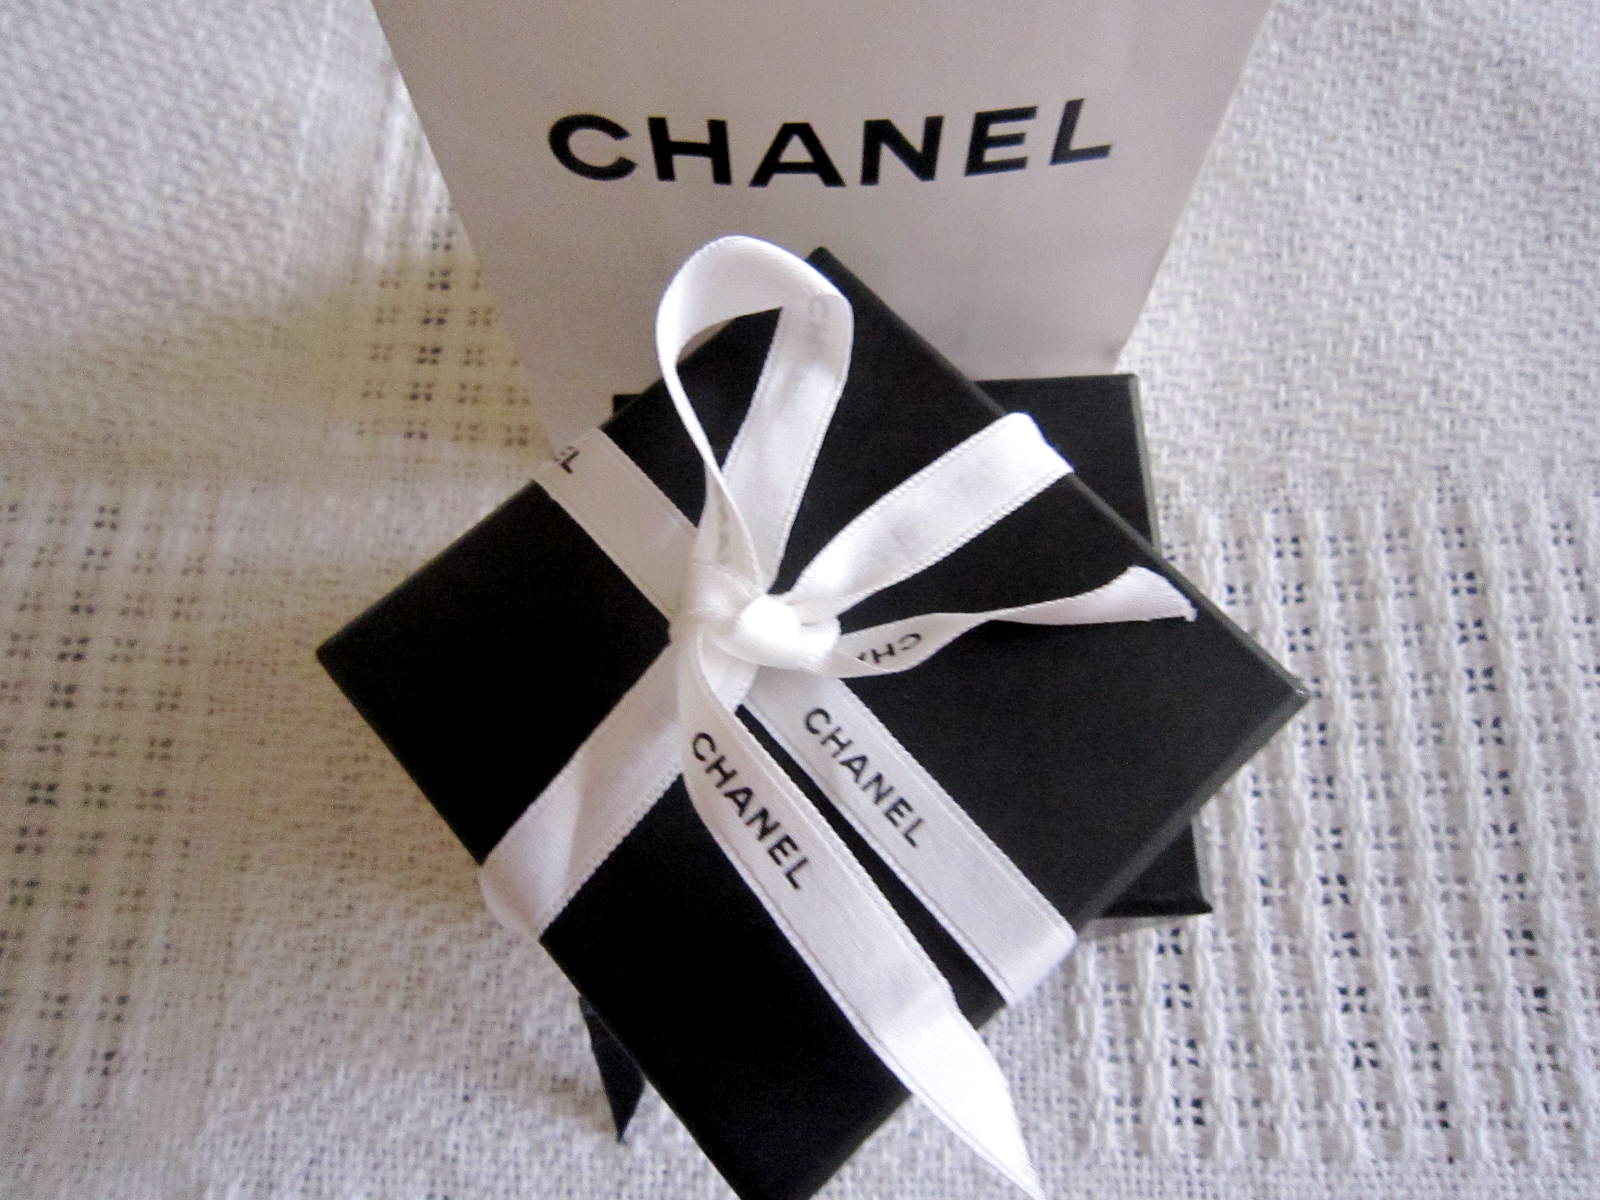 chanel box and dust bag